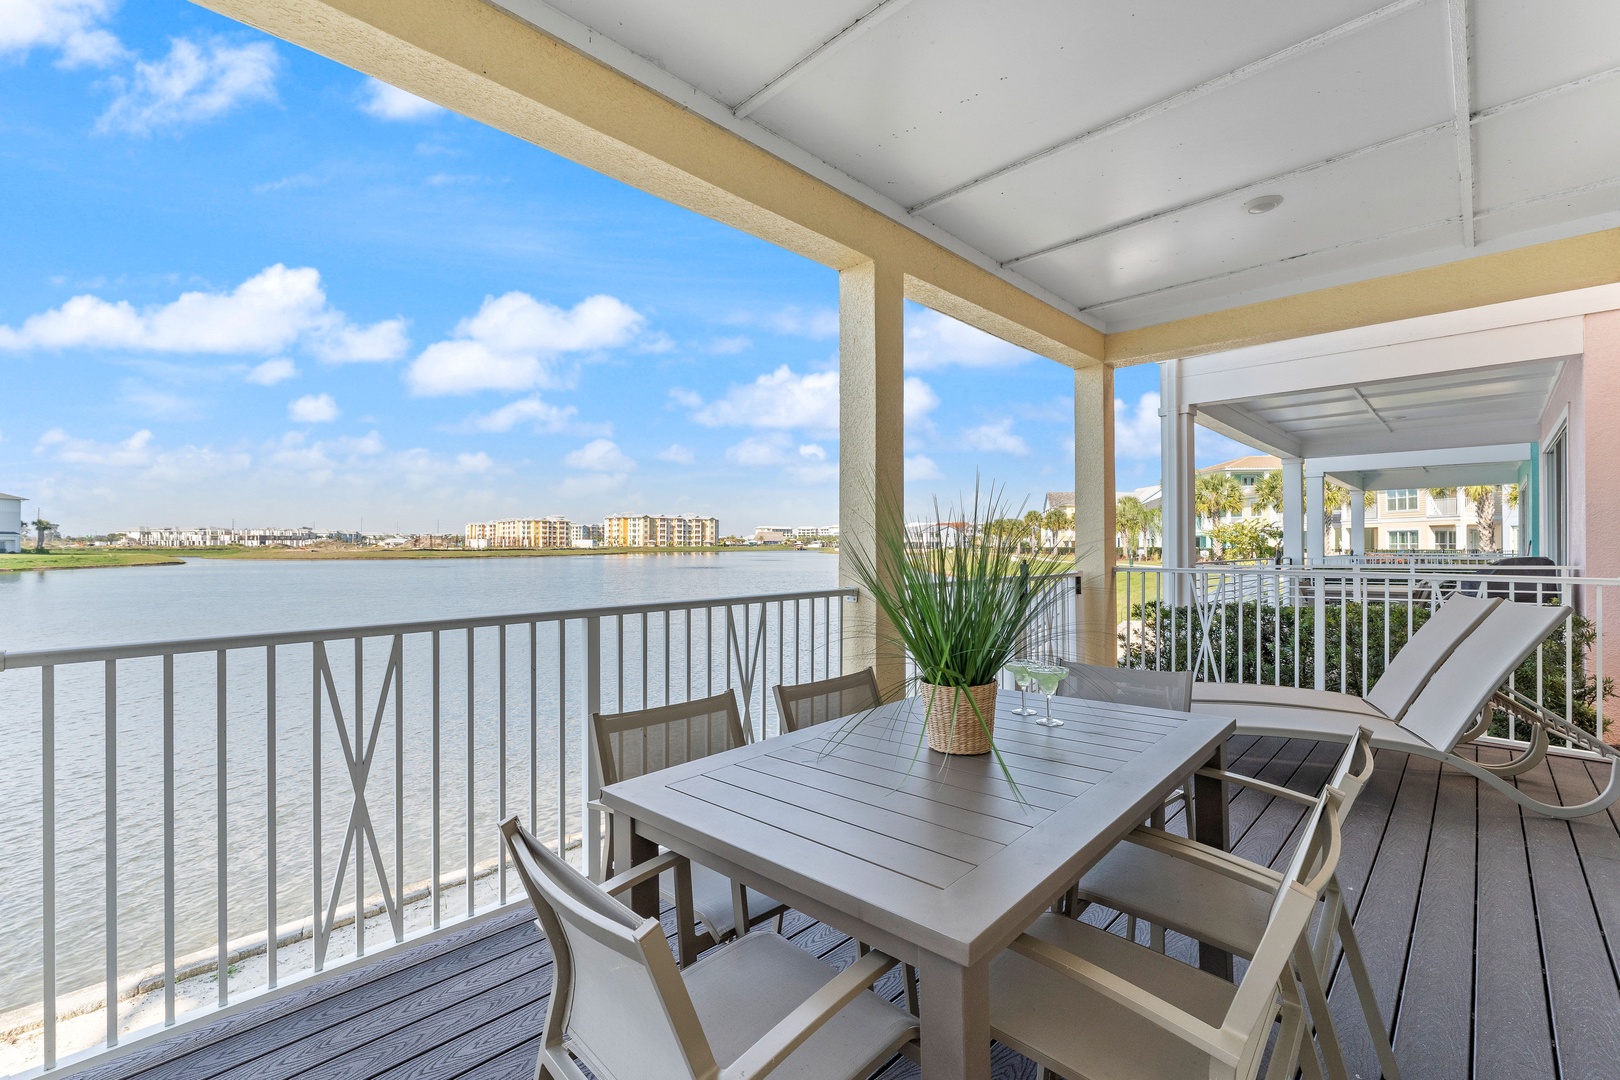 Lounge with waterfront views or dine al fresco on the deck